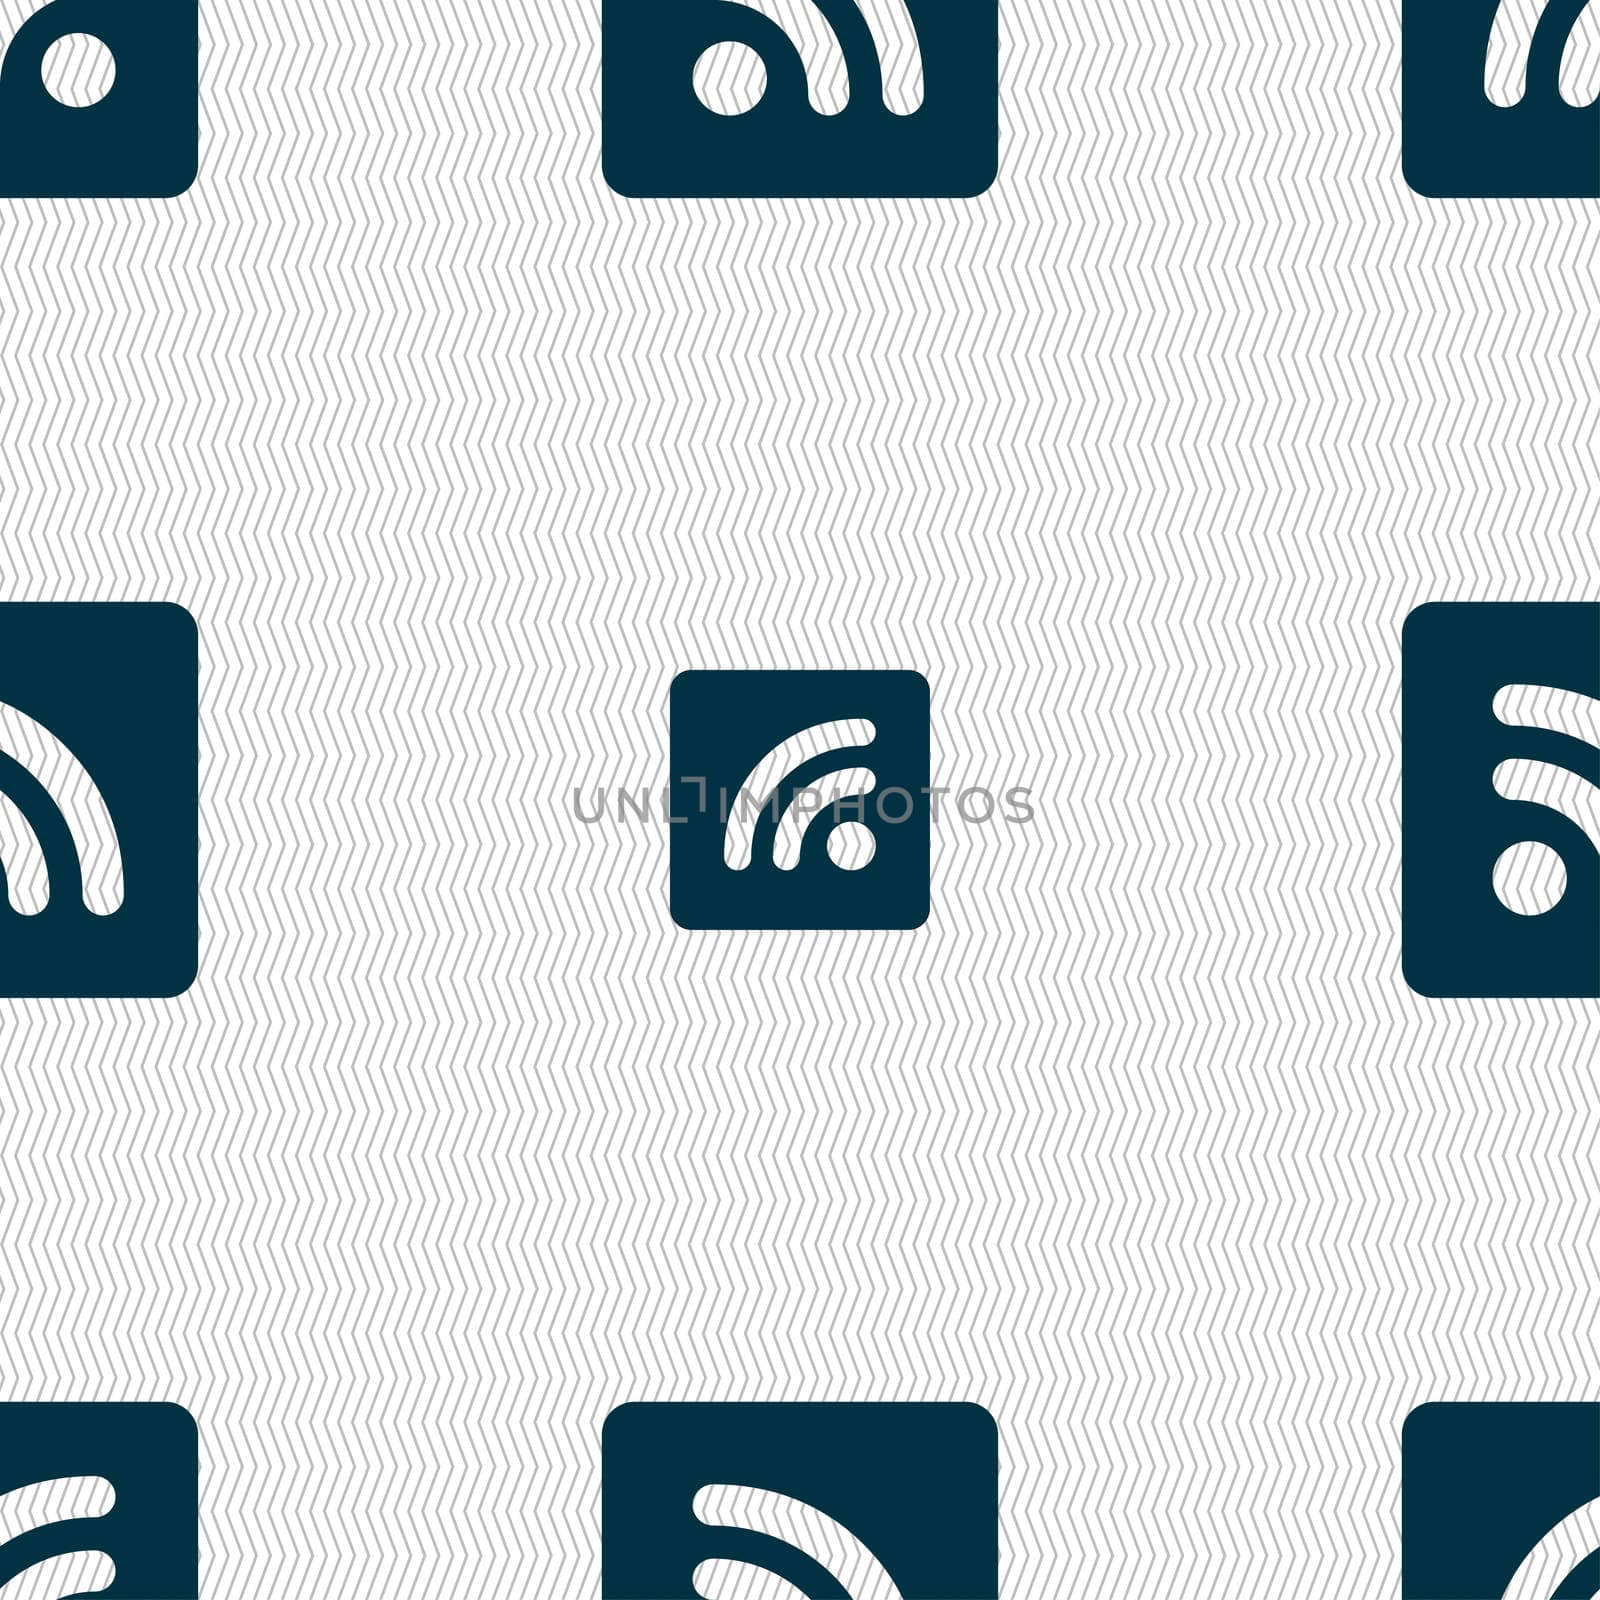 RSS feed icon sign. Seamless pattern with geometric texture. illustration